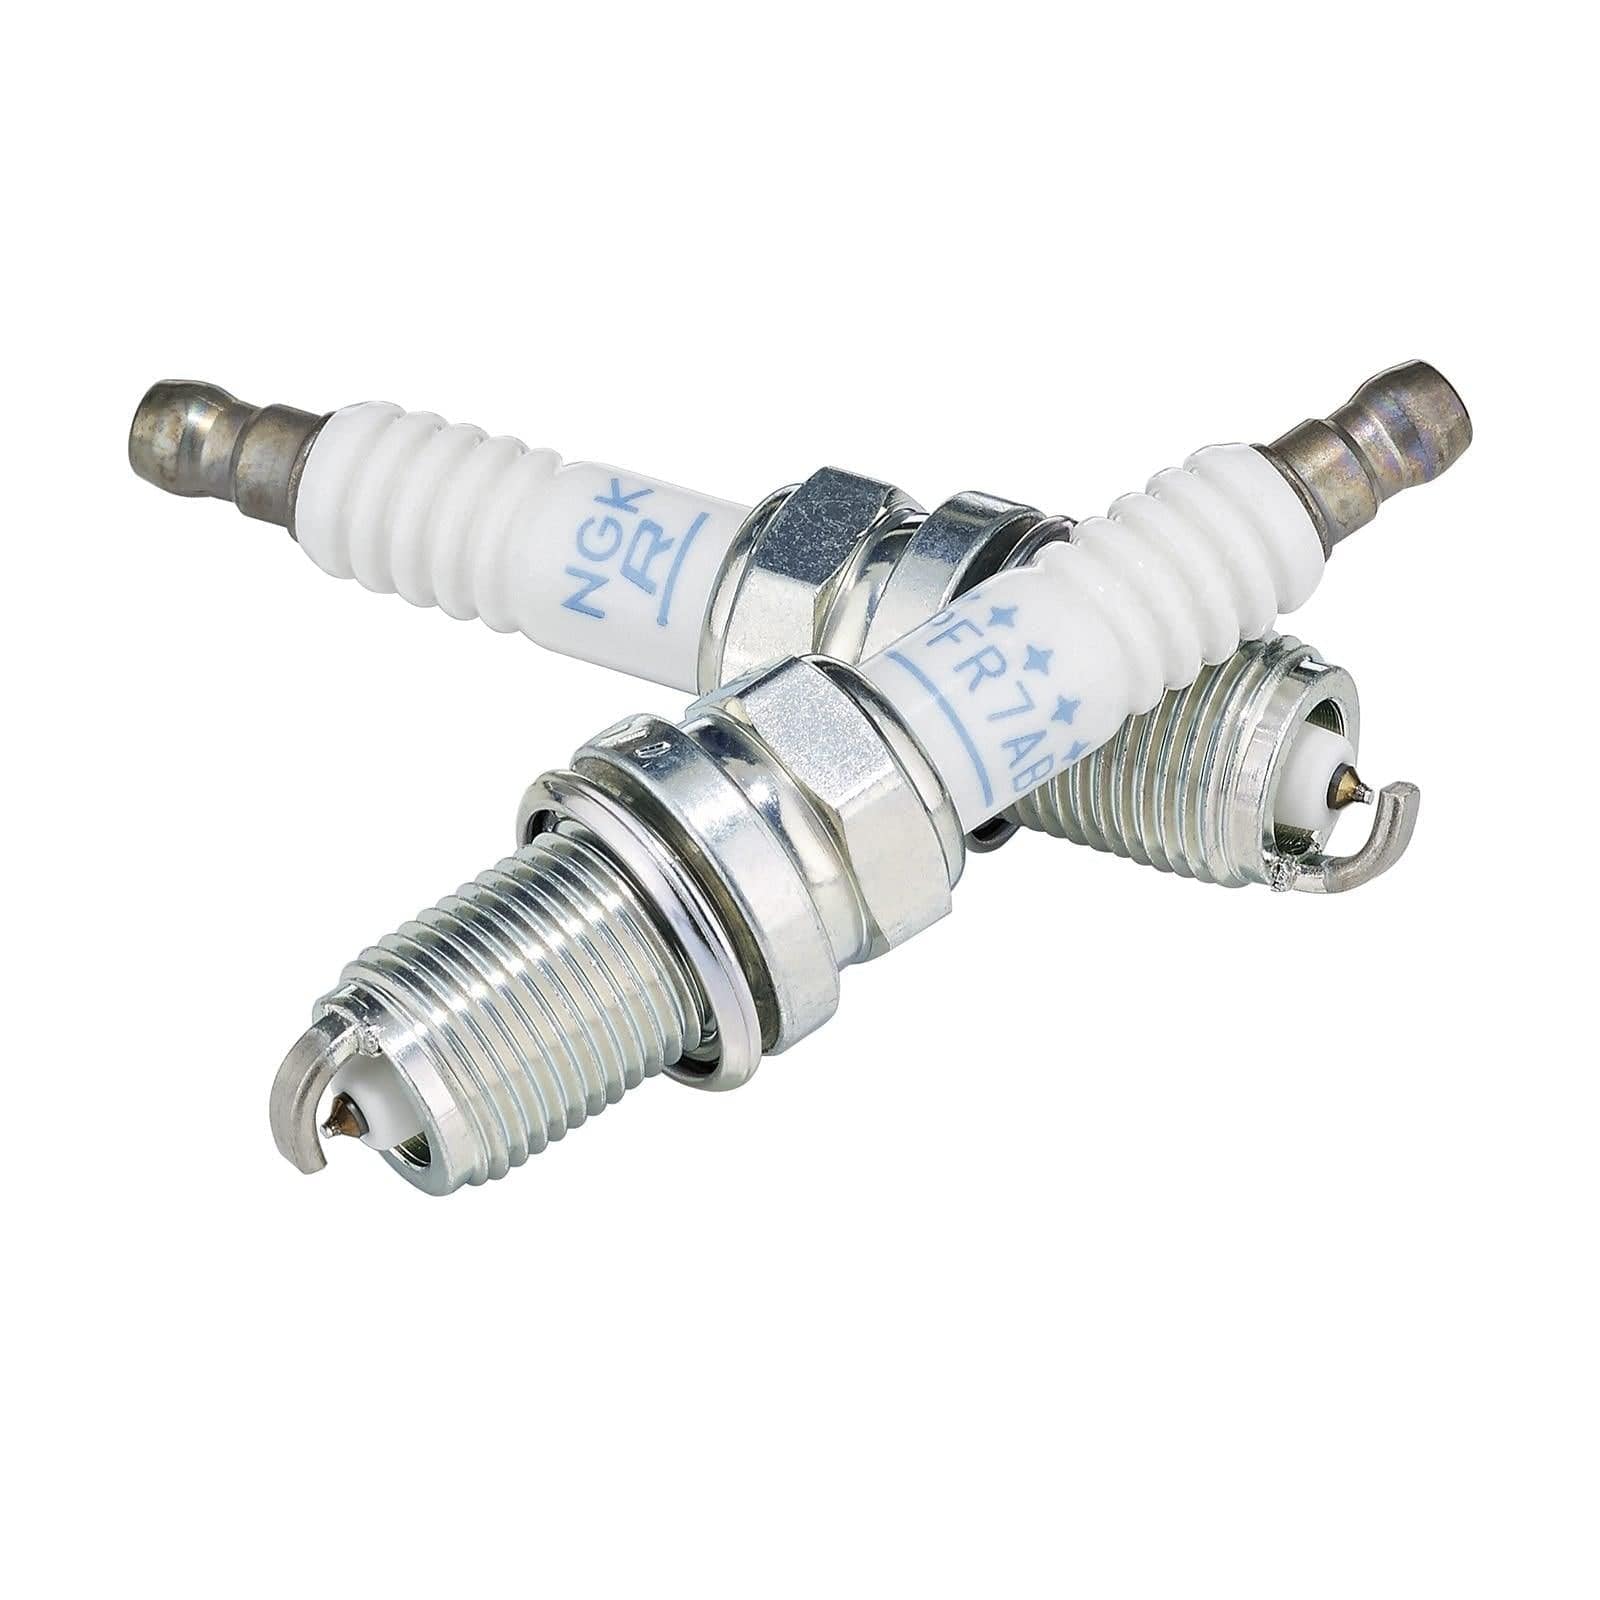 NGK Spark Plugs - 550F, 600RS - BR9ECS - Factory Recreation